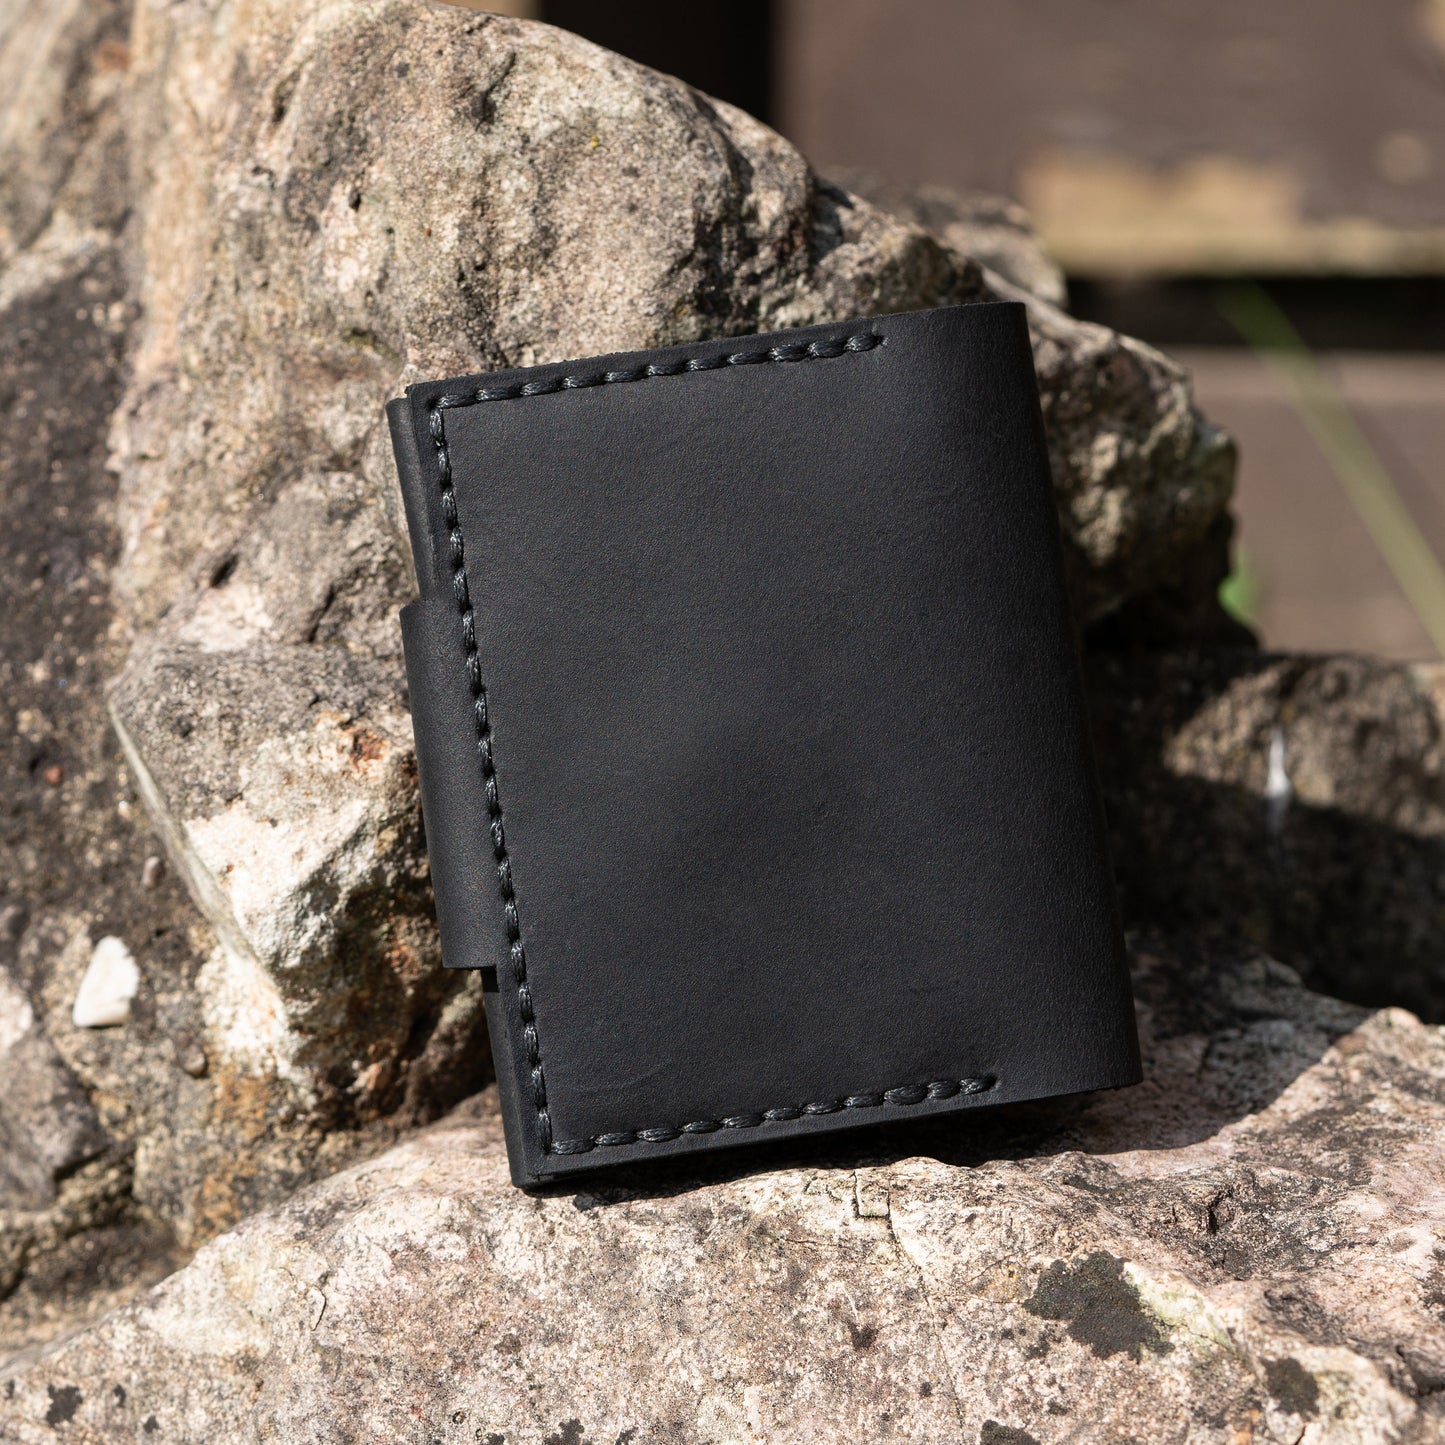 Minimalist Leather Wallet with Coin Pouch - Hand-Stitched, Card & Cash Compartments - Compact Design